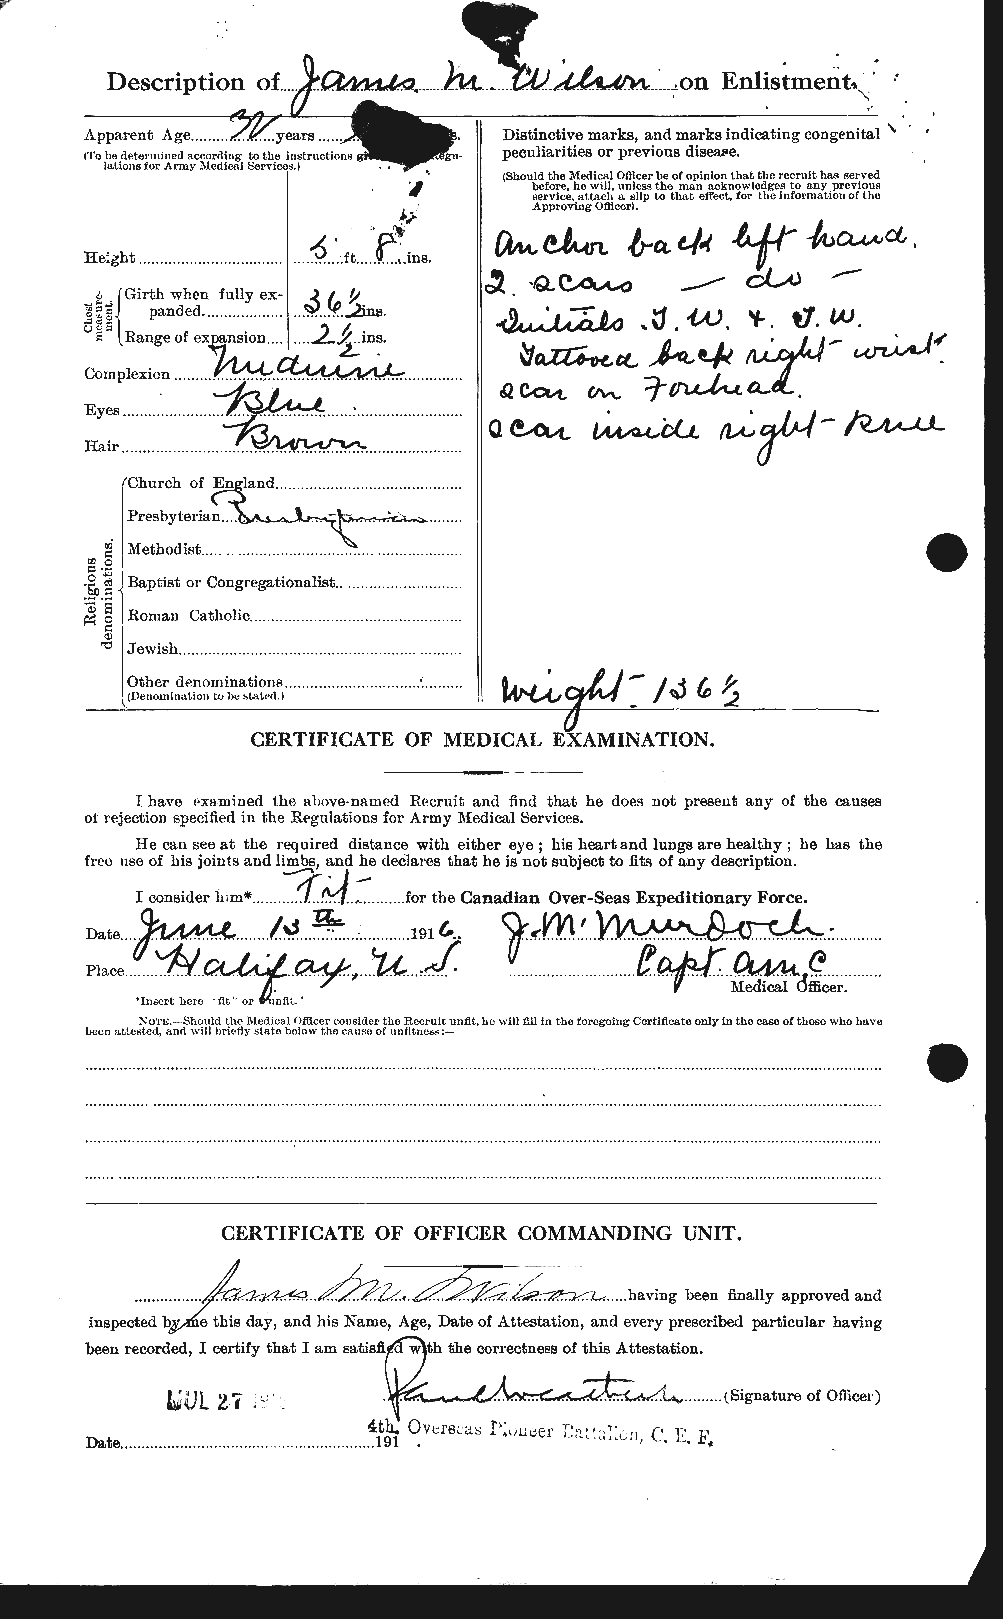 Personnel Records of the First World War - CEF 681487b